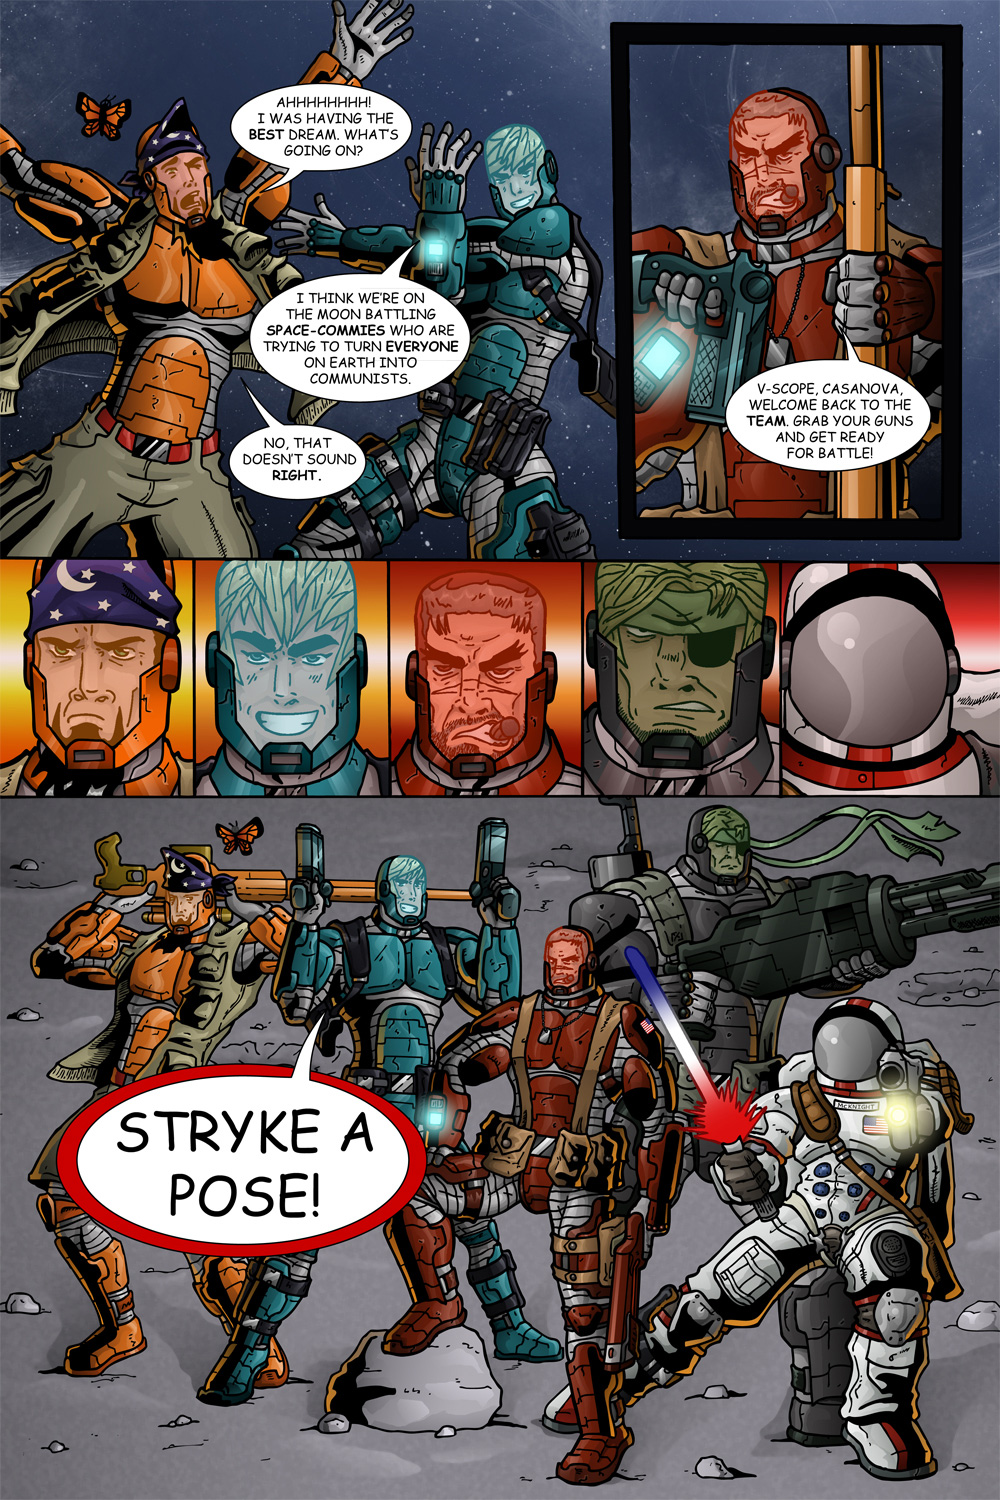 MISSION 007: PAGE 18 “STRYKE A POSE!”